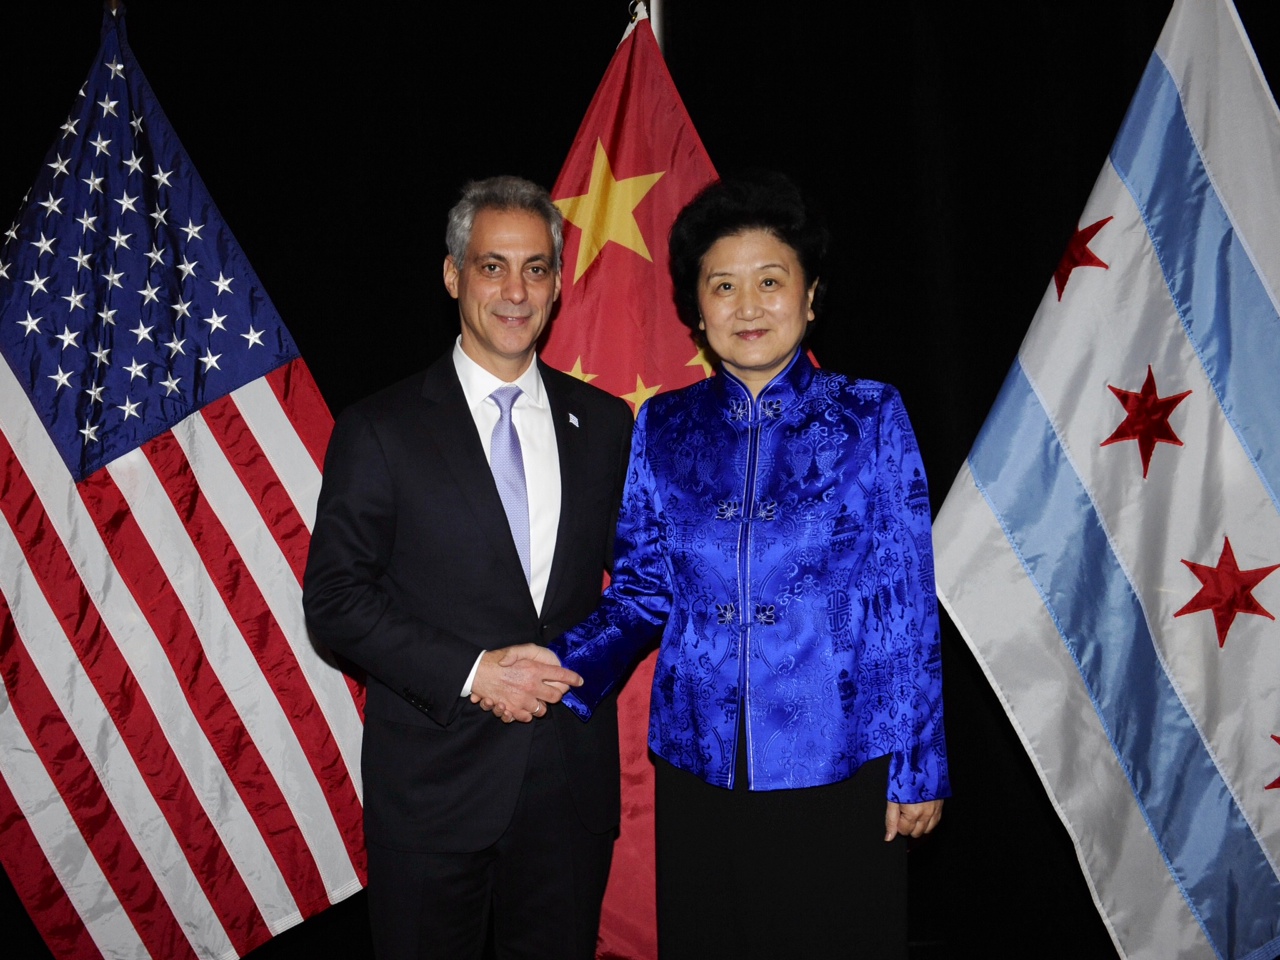 Mayor Rahm Emanuel welcomes Her Excellency Liu Yandong, the Vice Premier of the State Council of the People’s Republic of China to Chicago.